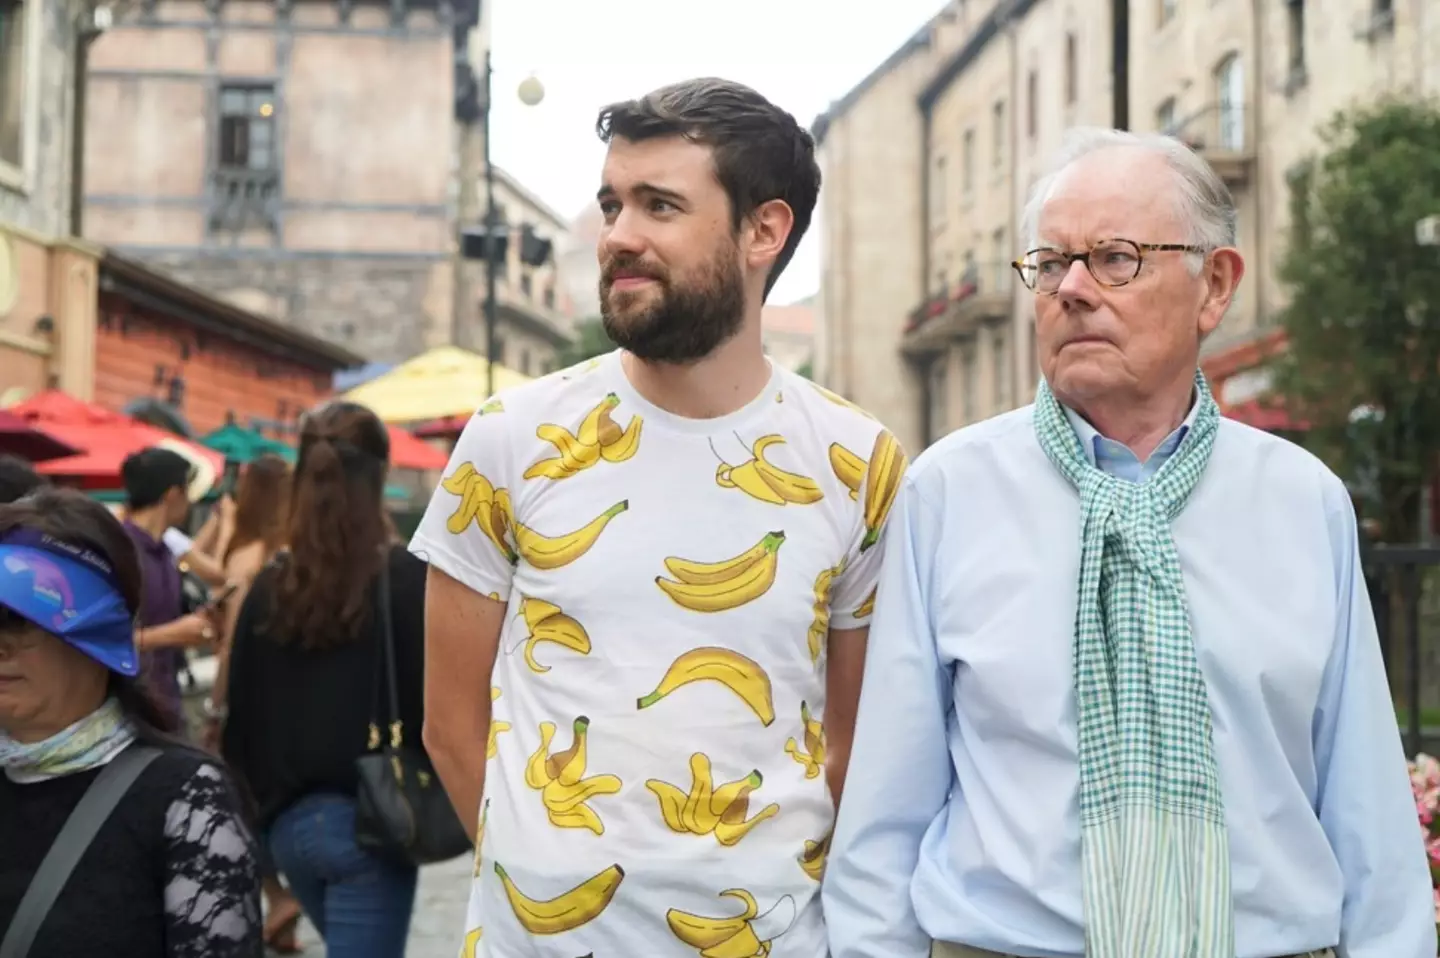 Jack Whitehall and his dad Michael Whitehall.